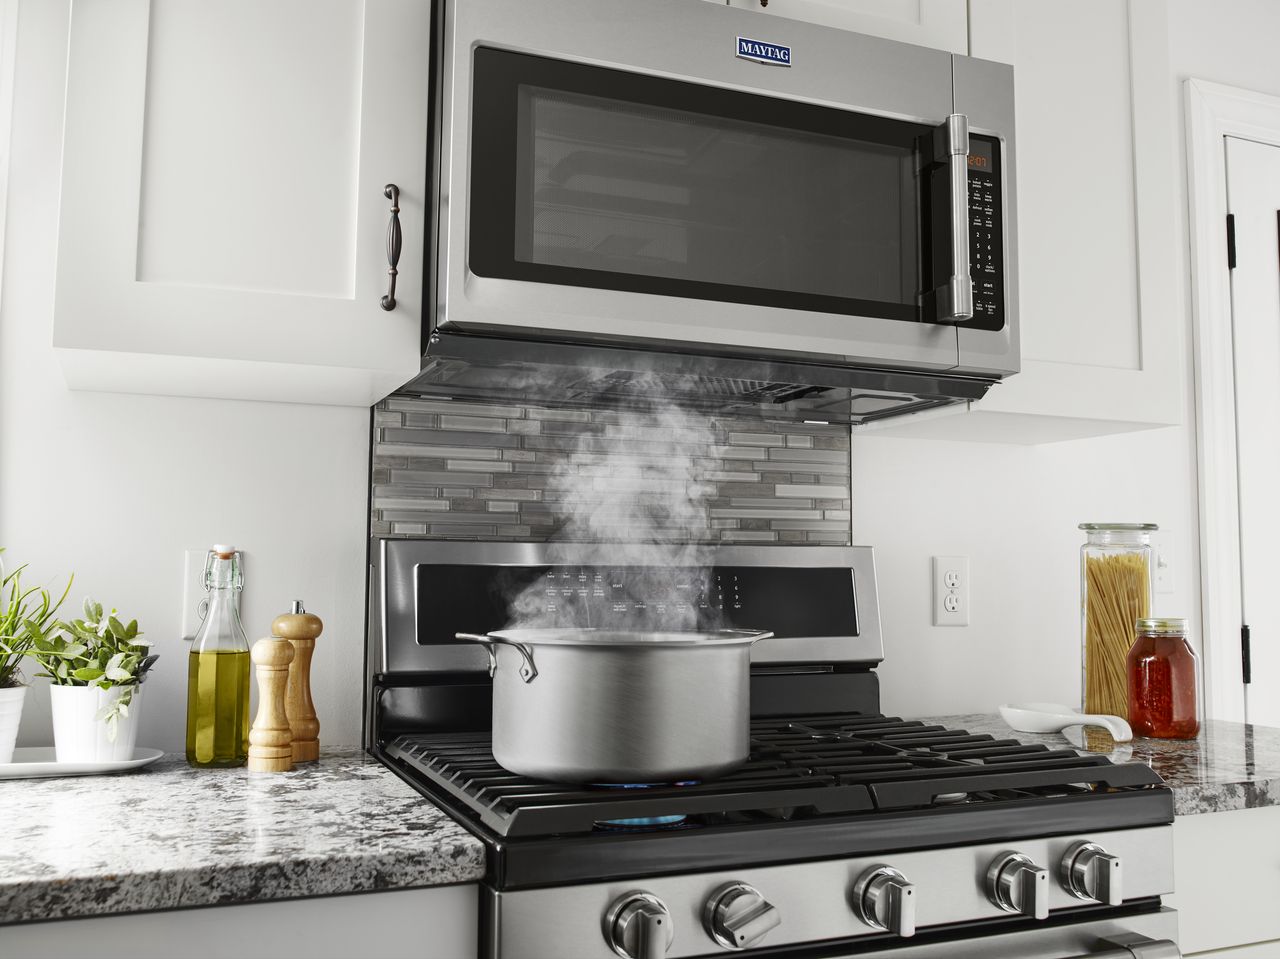 Choosing the Perfect Microwave Style for Your Kitchen